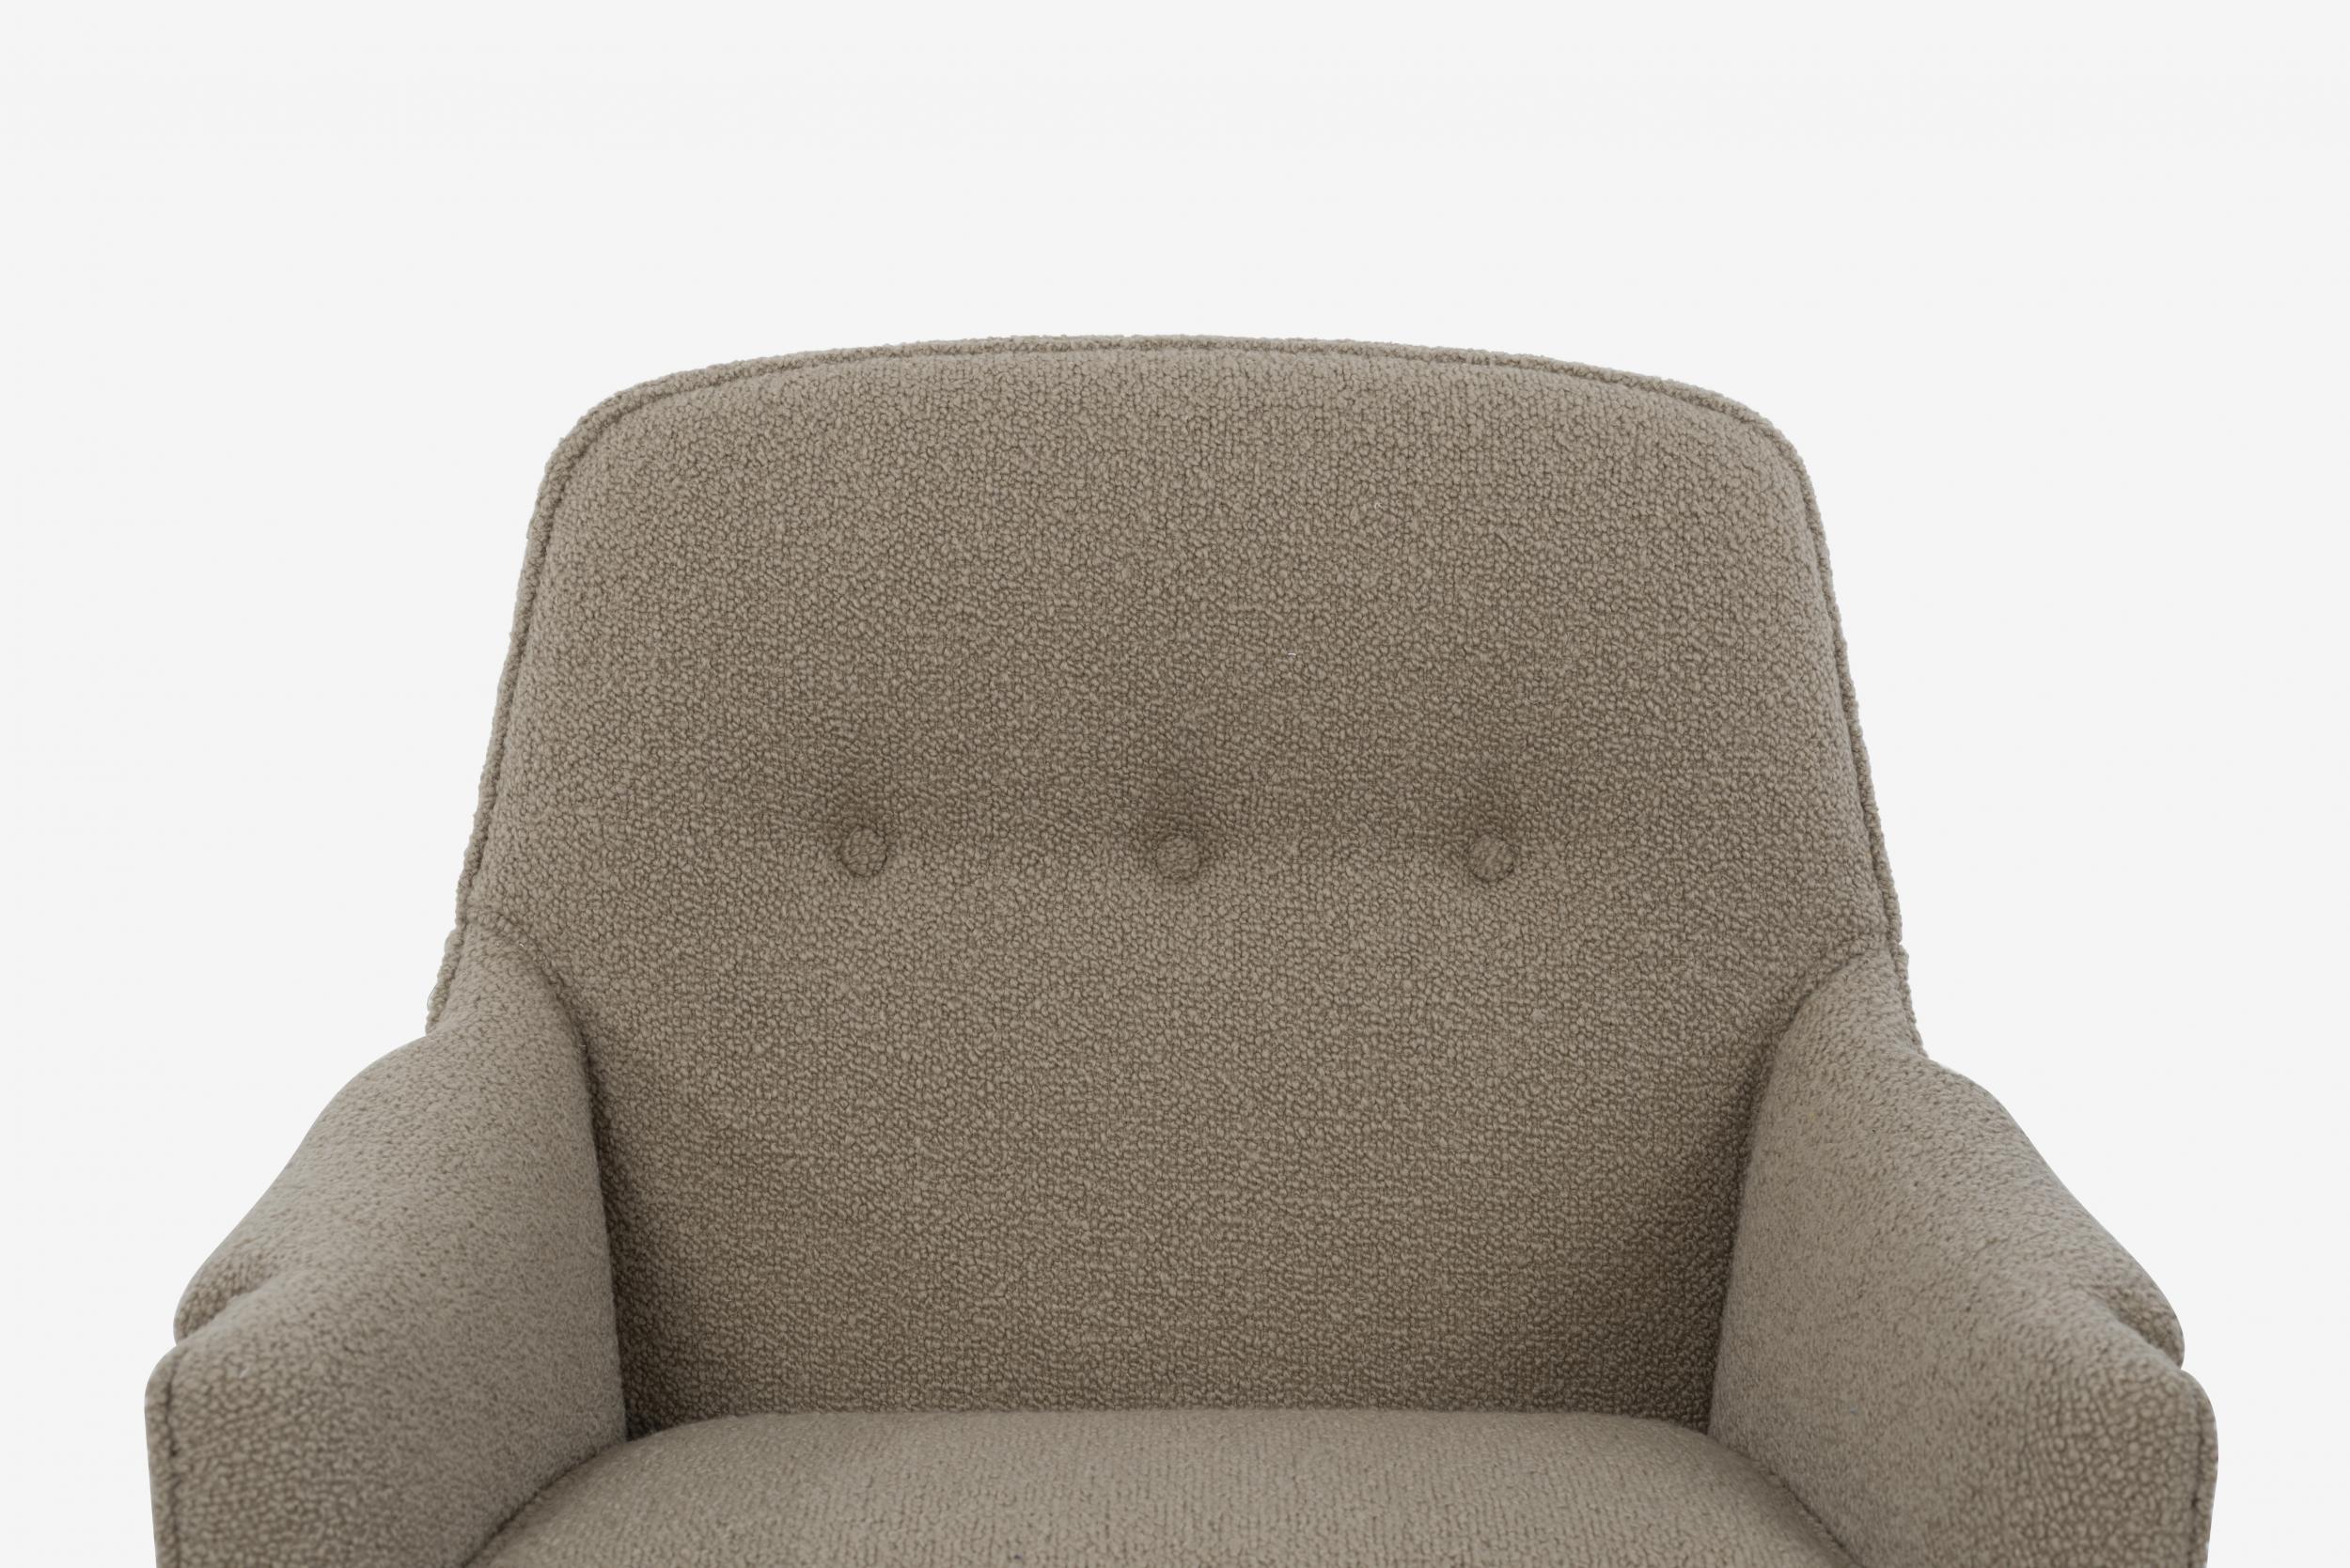 Appliqué Edward Wormley for Dunbar Pair of Lounges Chairs in Knoll Boucle